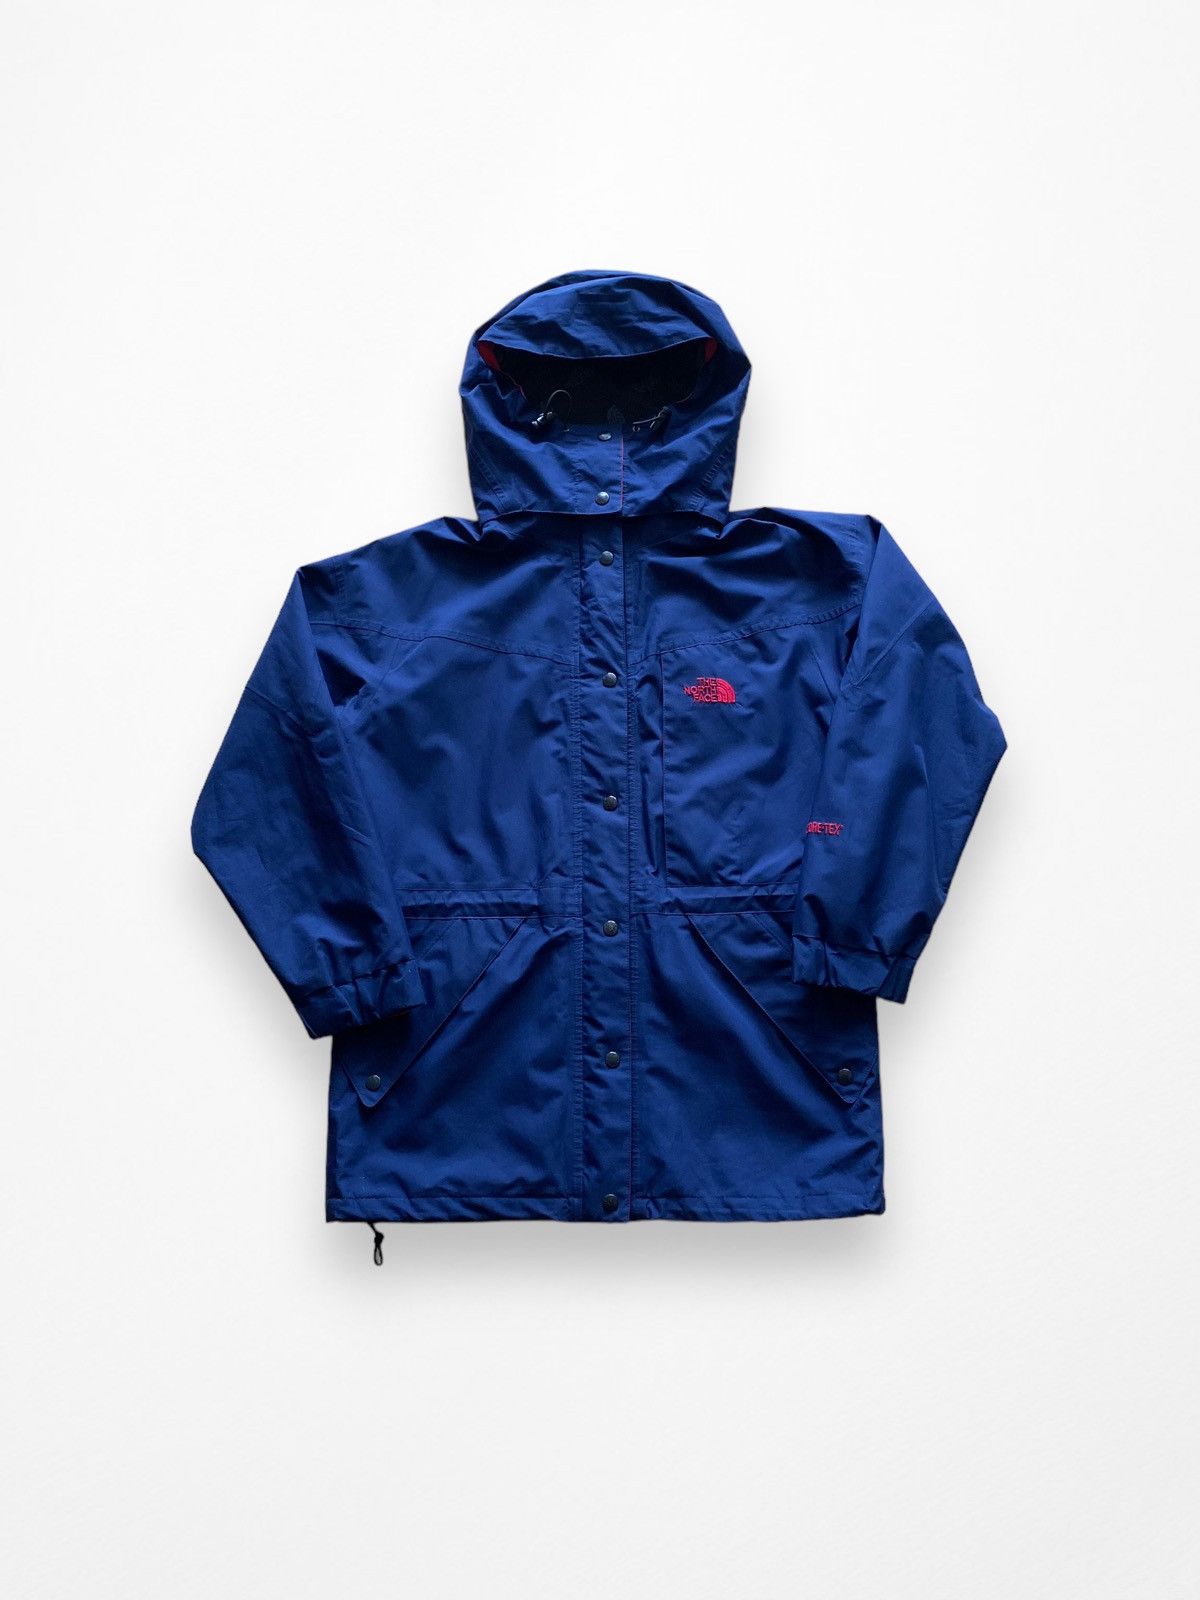 Vintage The North Face Stowaway III Vintage Gore-tex W Jacket TNF | Grailed